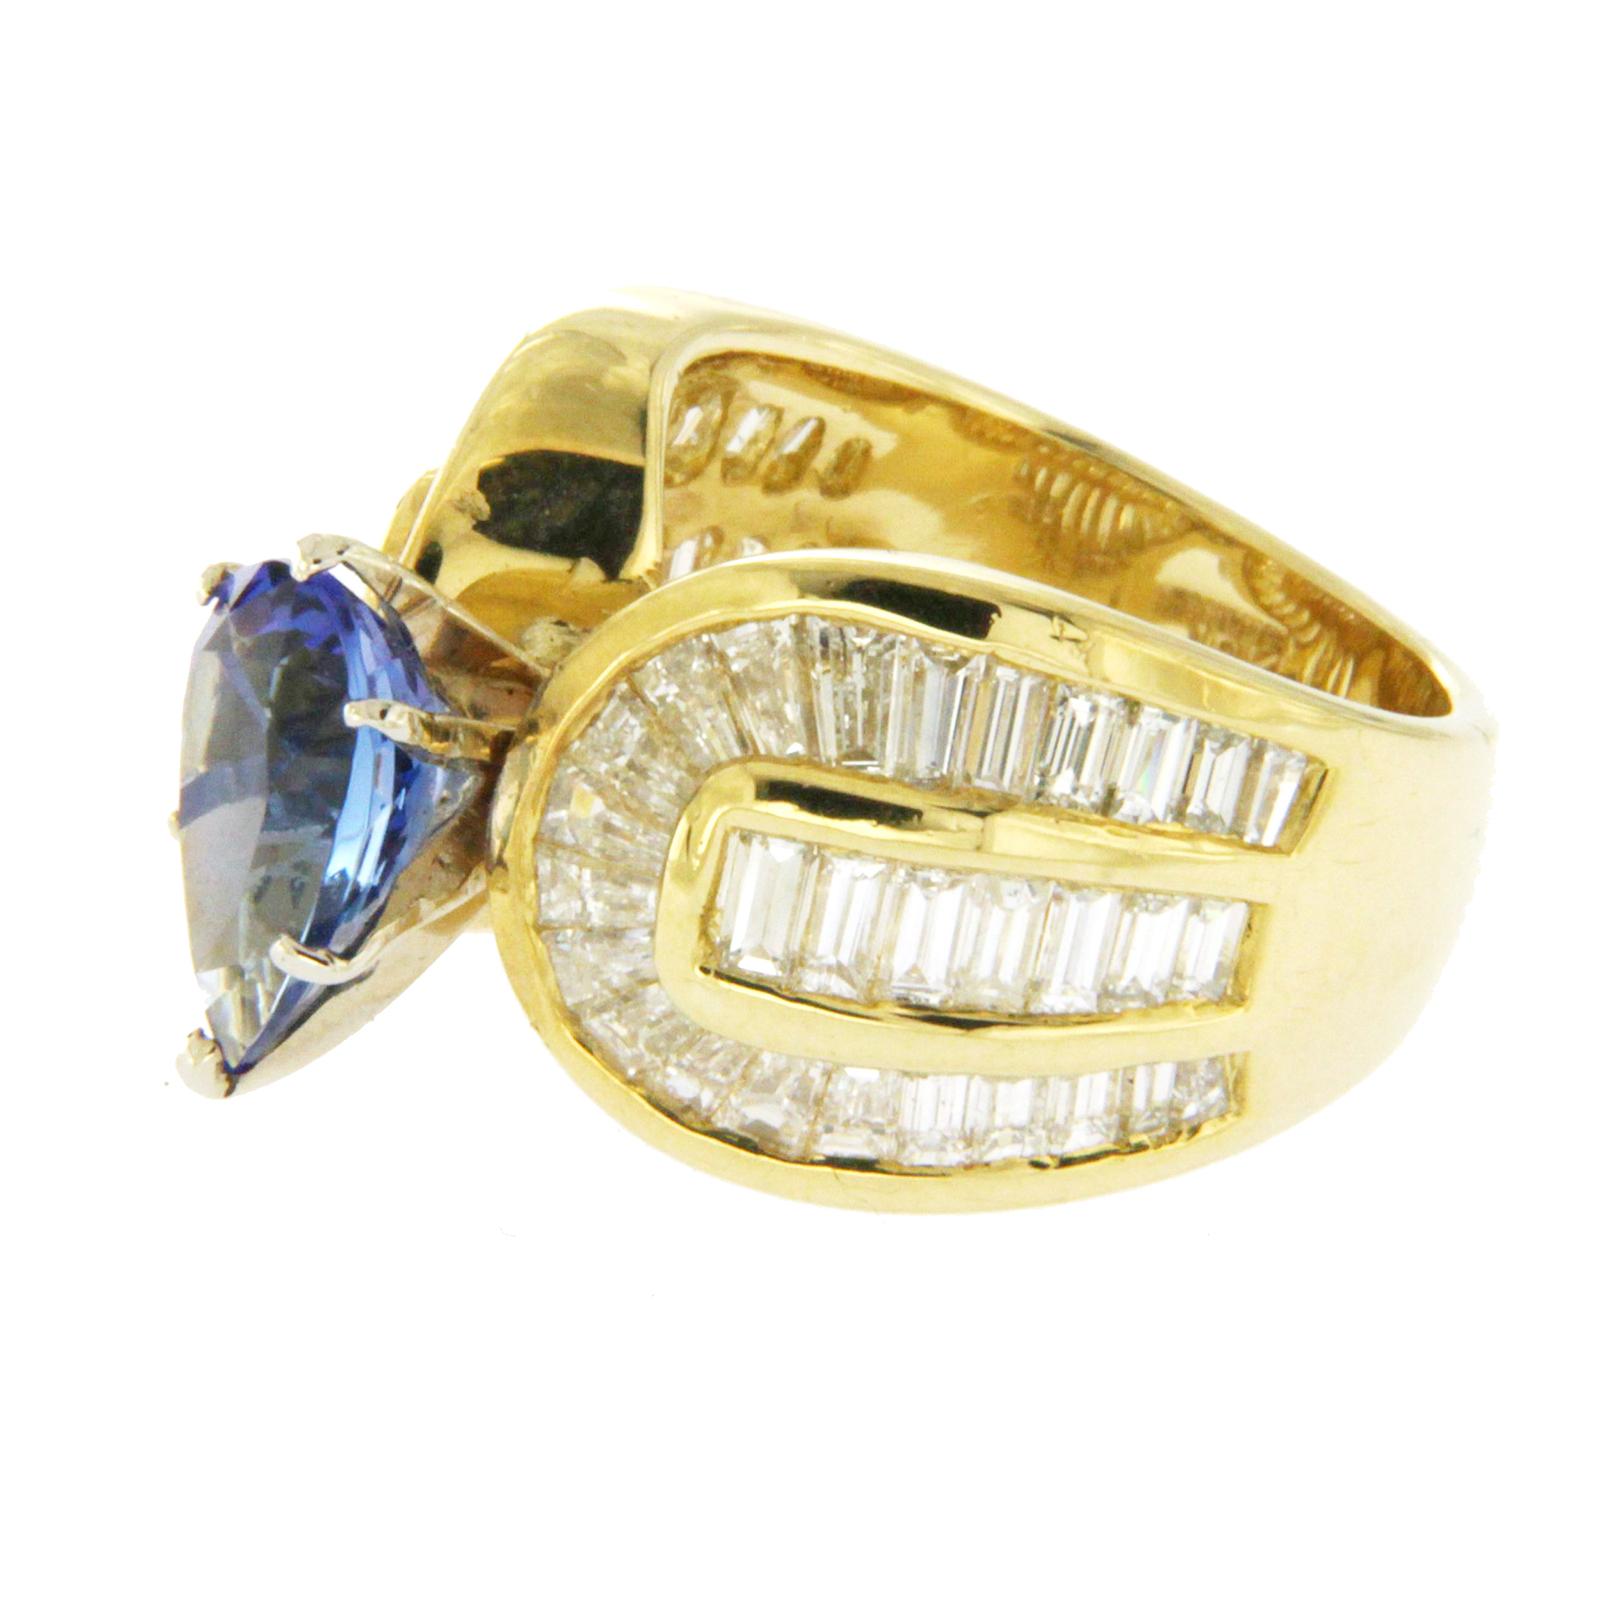 Top: 12.5 mm
Band Width: 5.5 mm
Metal: 18K Yellow Gold 
Size: Message us for size
Hallmarks: 18K
Total Weight: 16.6 Grams
Stone Type: 4.70 CT Natural Blue Tanzanite 2.60 CT G SI2 Diamonds
Condition: New
Estimated Retail Price: $9500
Stock Number: RF